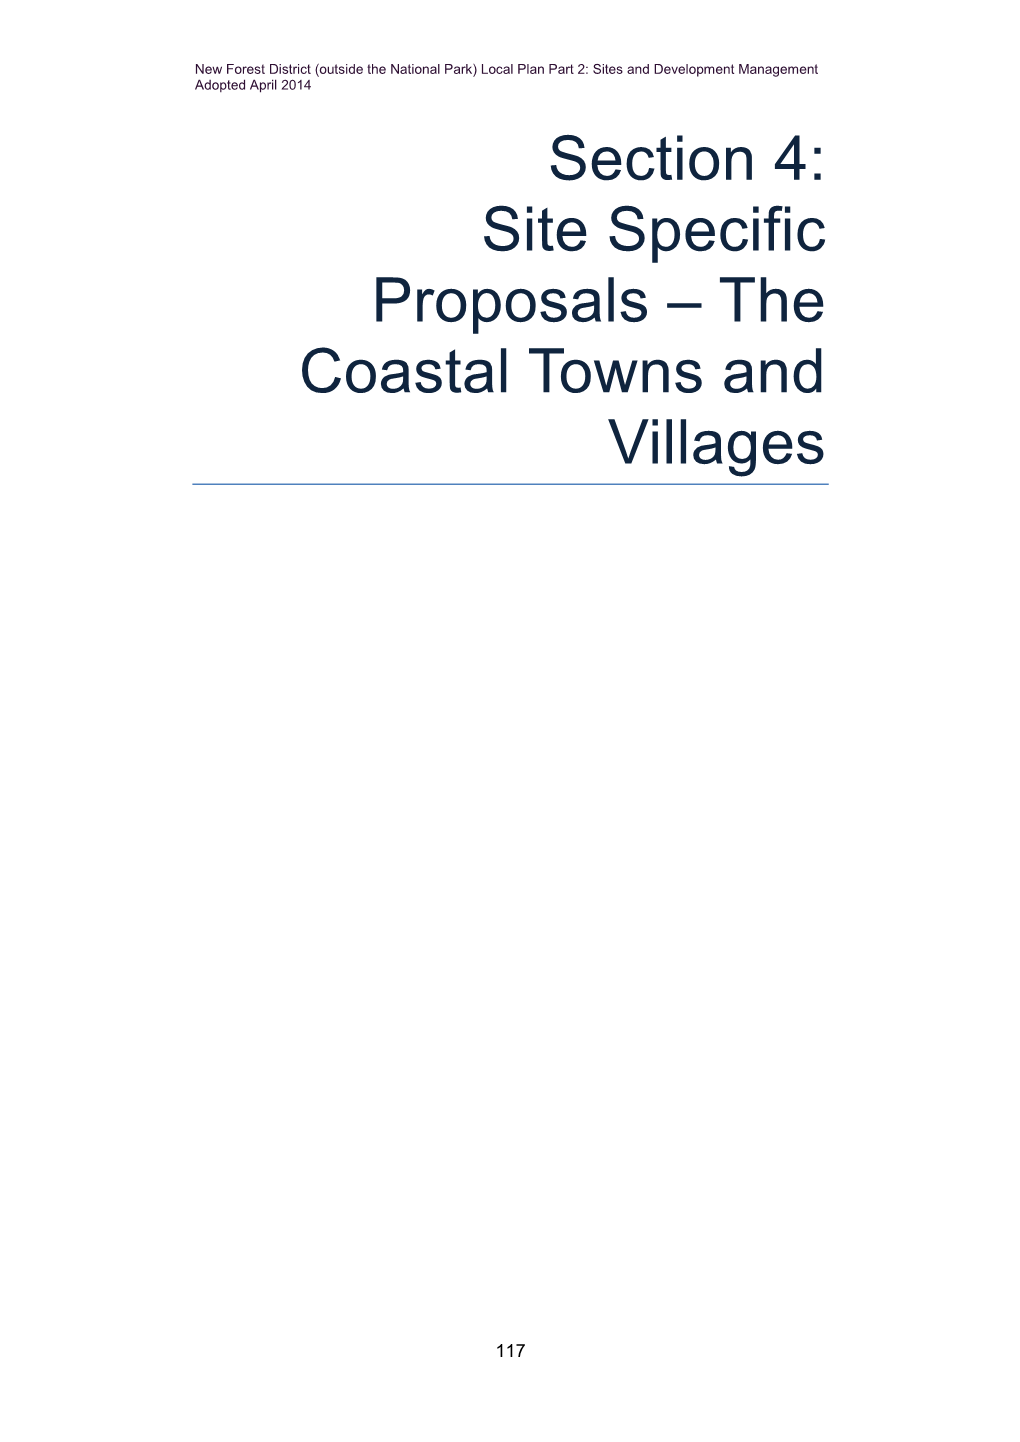 Section 4: Site Specific Proposals – the Coastal Towns and Villages